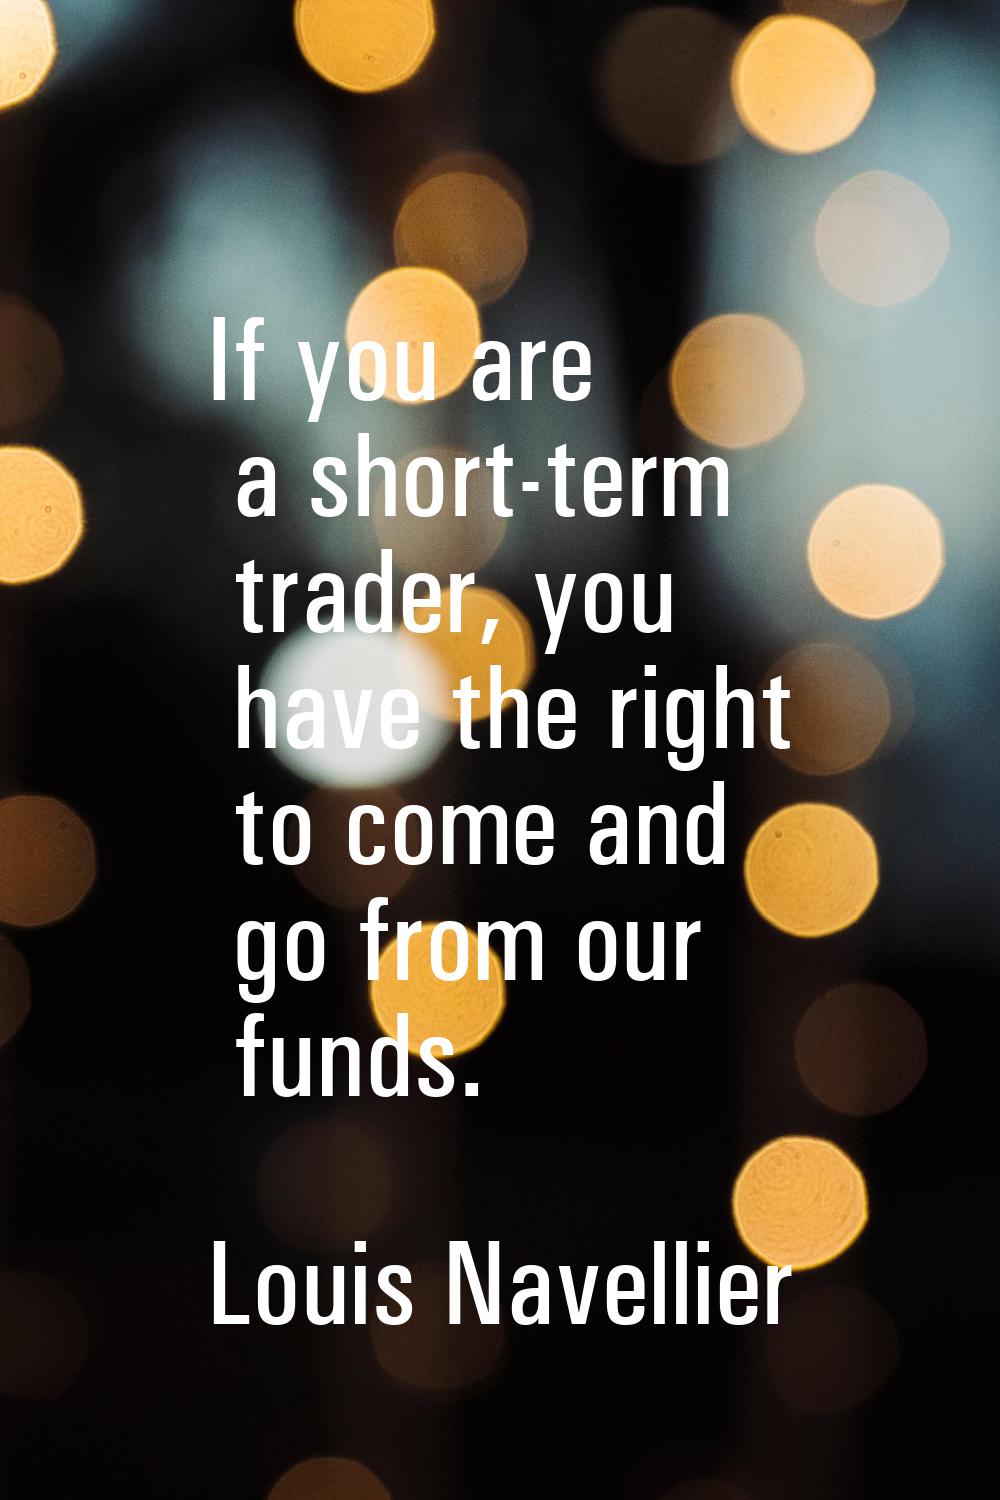 If you are a short-term trader, you have the right to come and go from our funds.